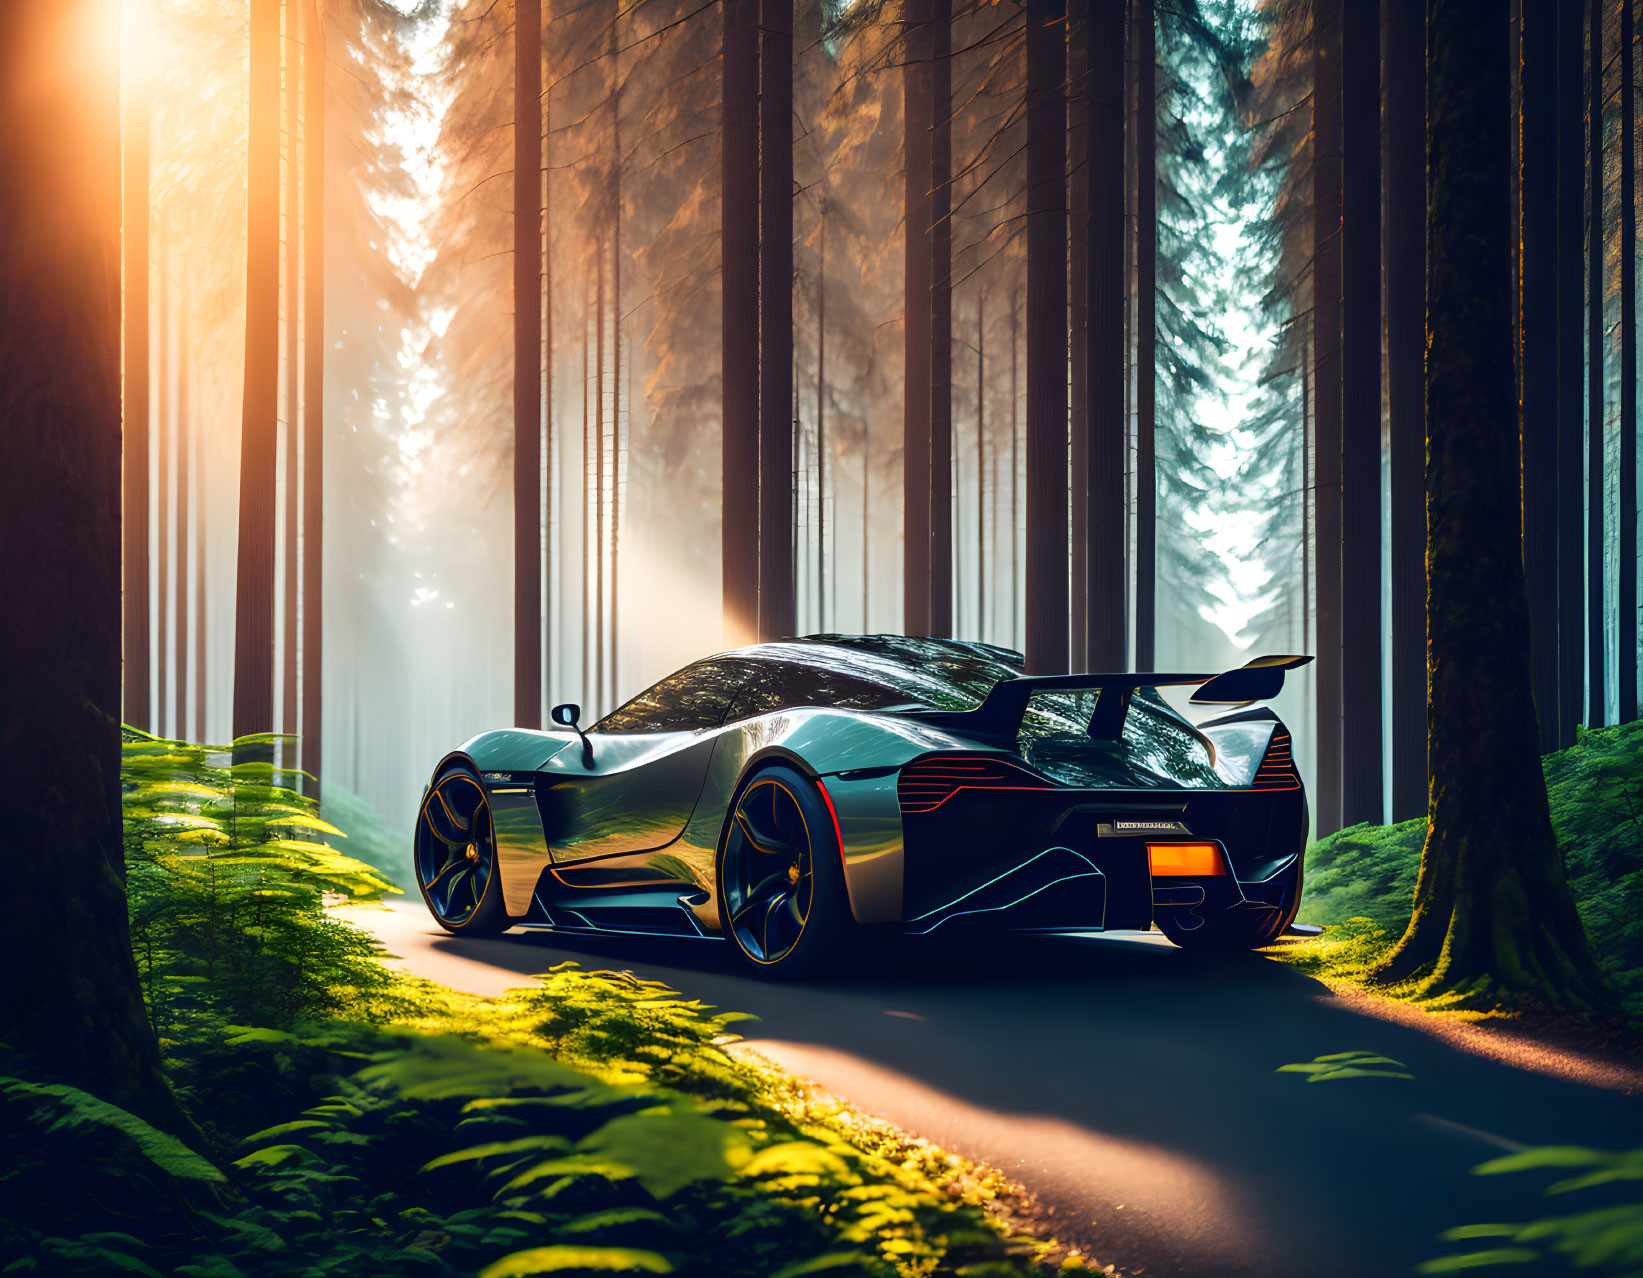 Luxury sports car parked in forest setting at golden hour